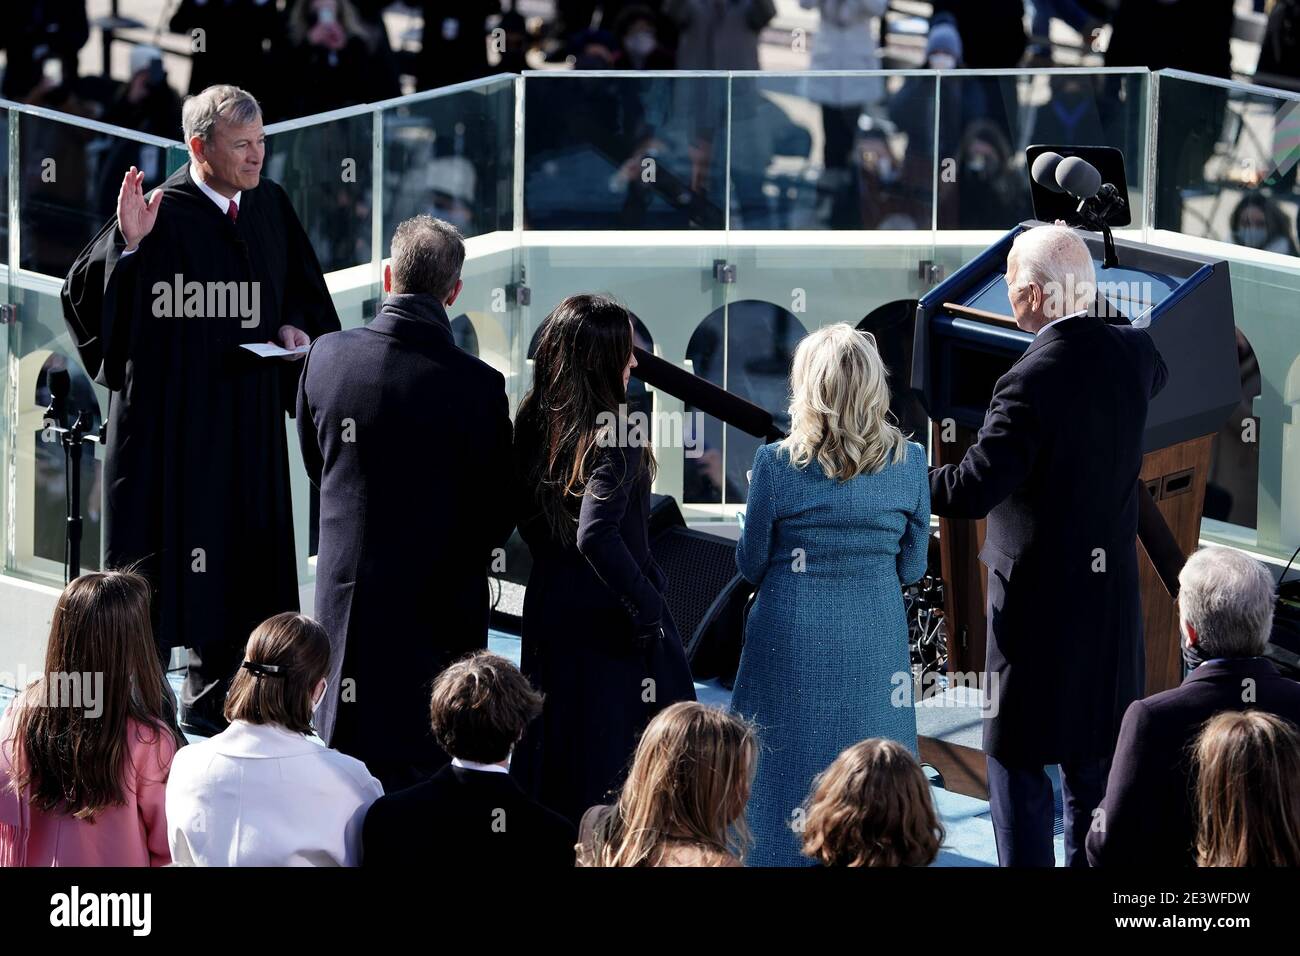 President Joe Biden takes the oath of office during the 59th Presidential Inauguration on Wednesday, January 20, 2021 at the U.S. Capitol in Washington, DC/MediaPunch Stock Photo